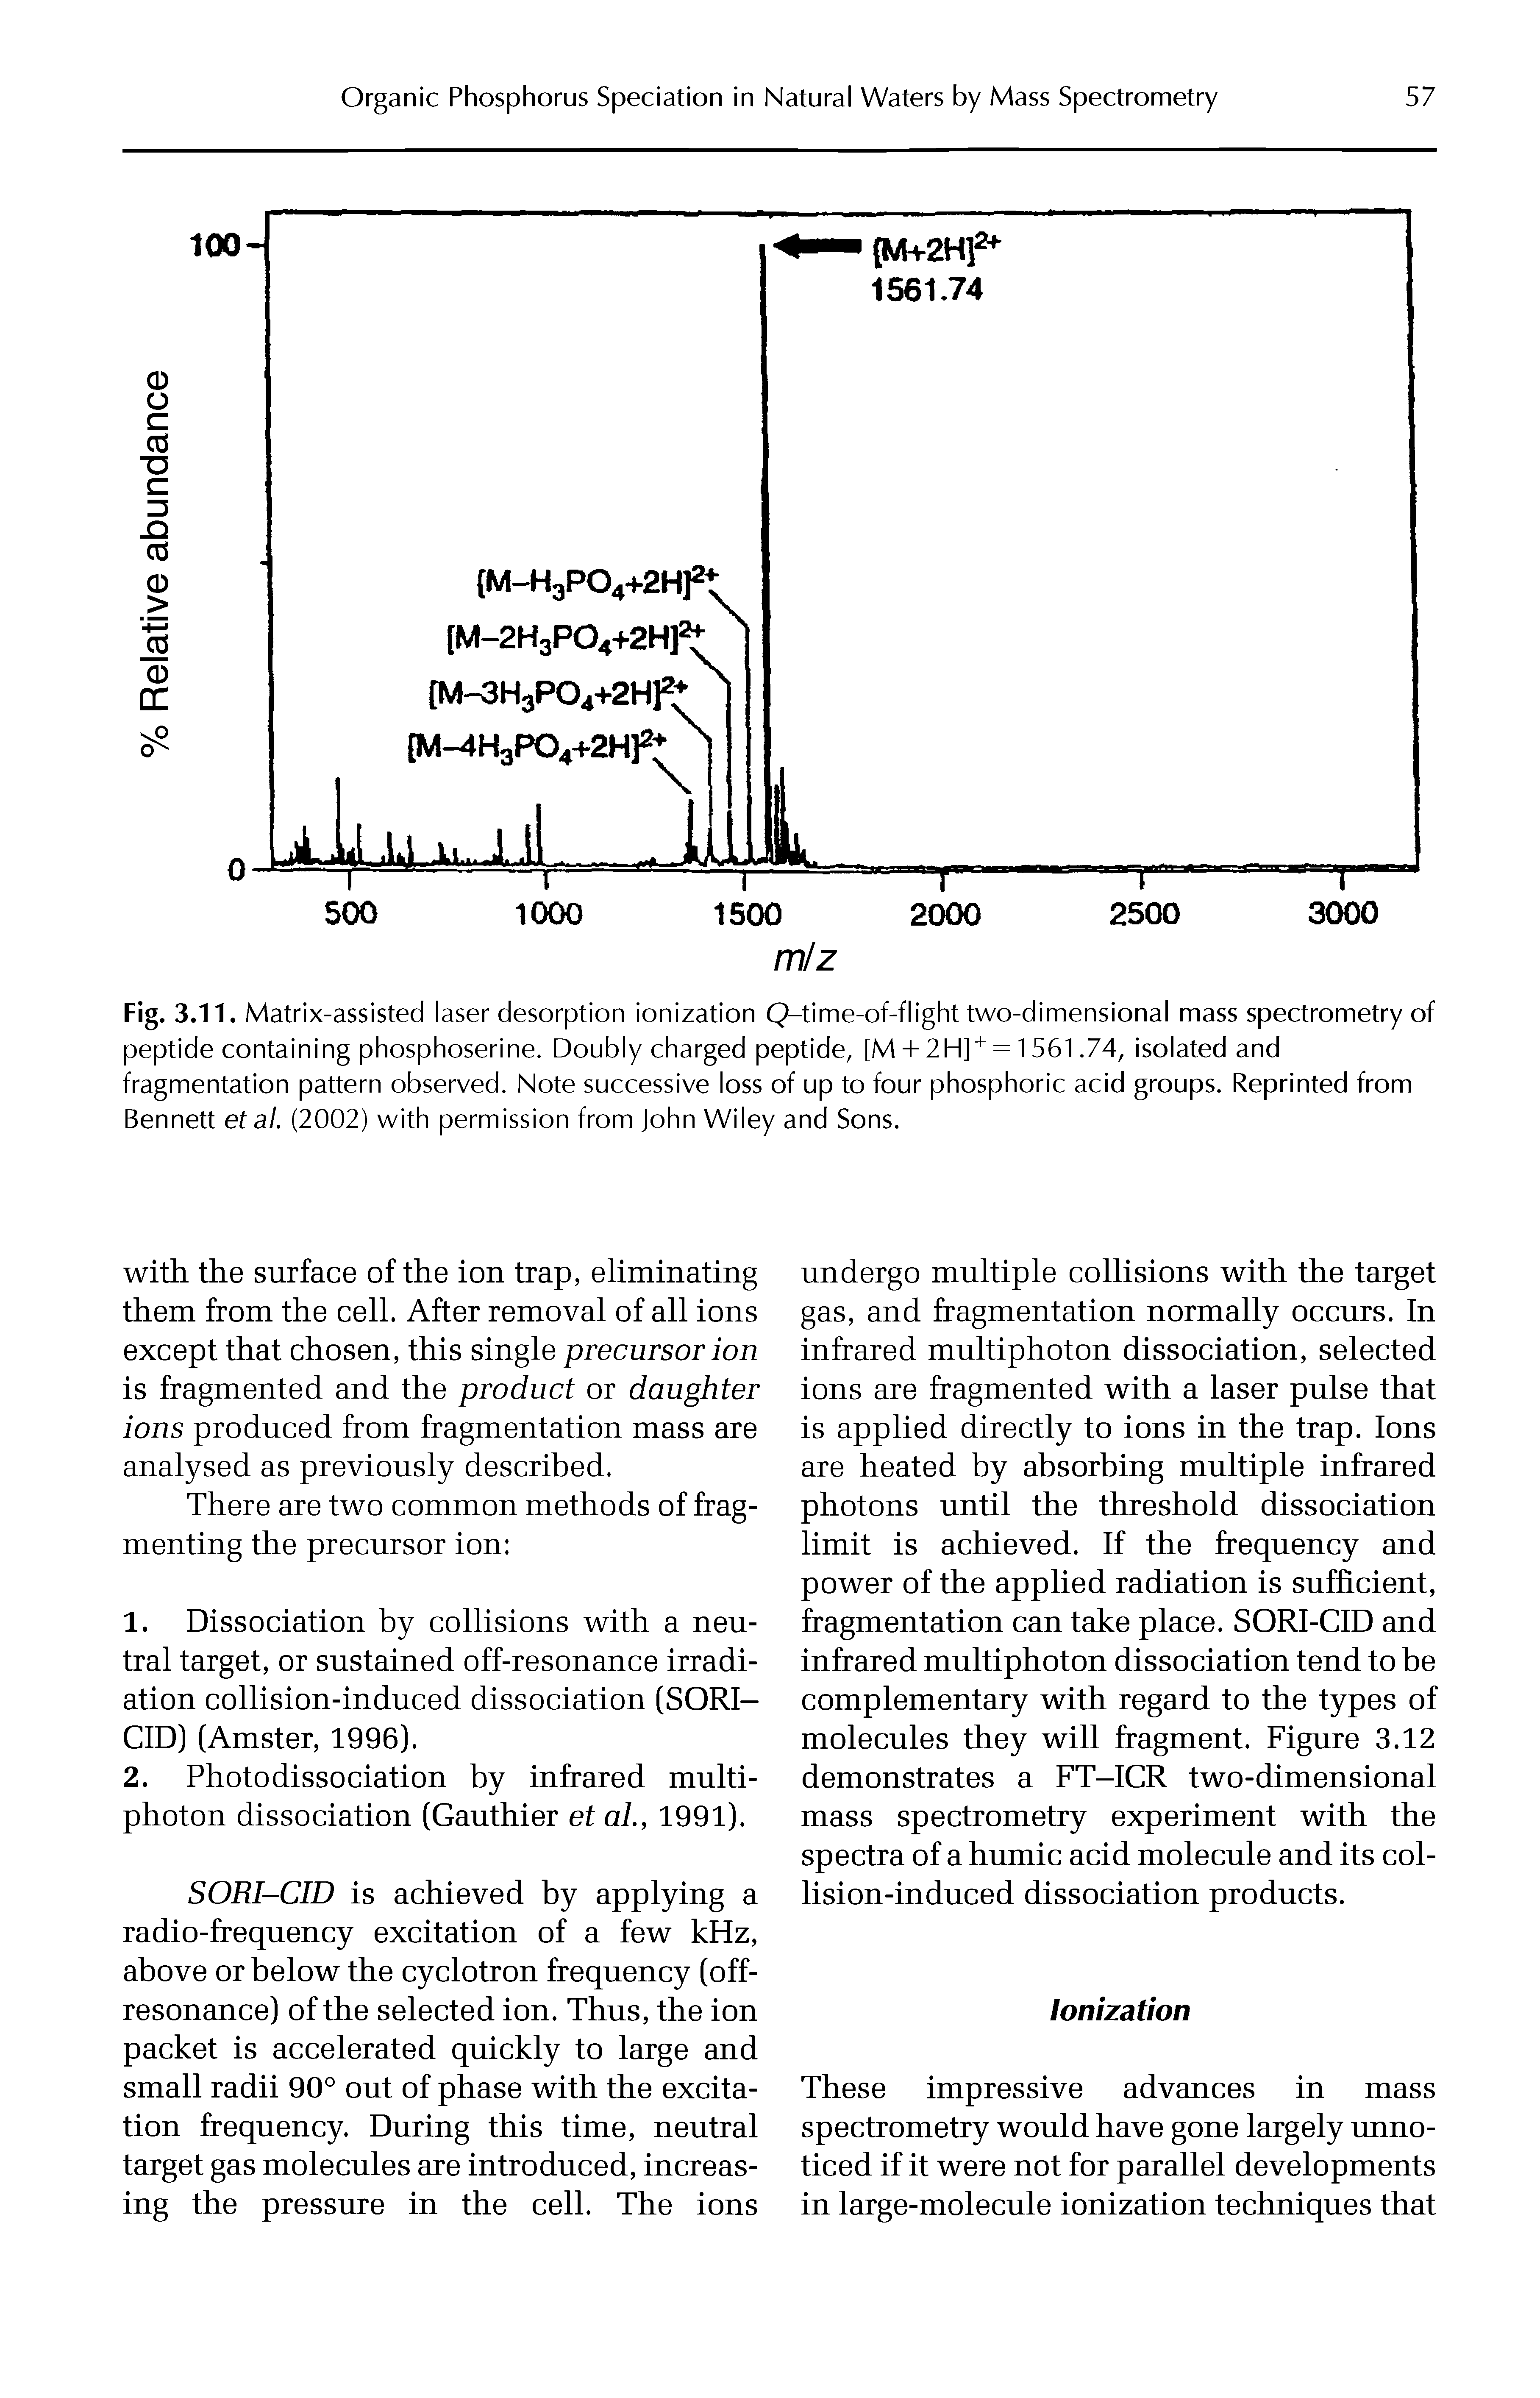 Fig. 3.11. Matrix-assisted laser desorption ionization Q-time-of-flight two-dimensional mass spectrometry of peptide containing phosphoserine. Doubly charged peptide, [M + 2H] += 1561.74, isolated and fragmentation pattern observed. Note successive loss of up to four phosphoric acid groups. Reprinted from Bennett et al. (2002) with permission from John Wiley and Sons.